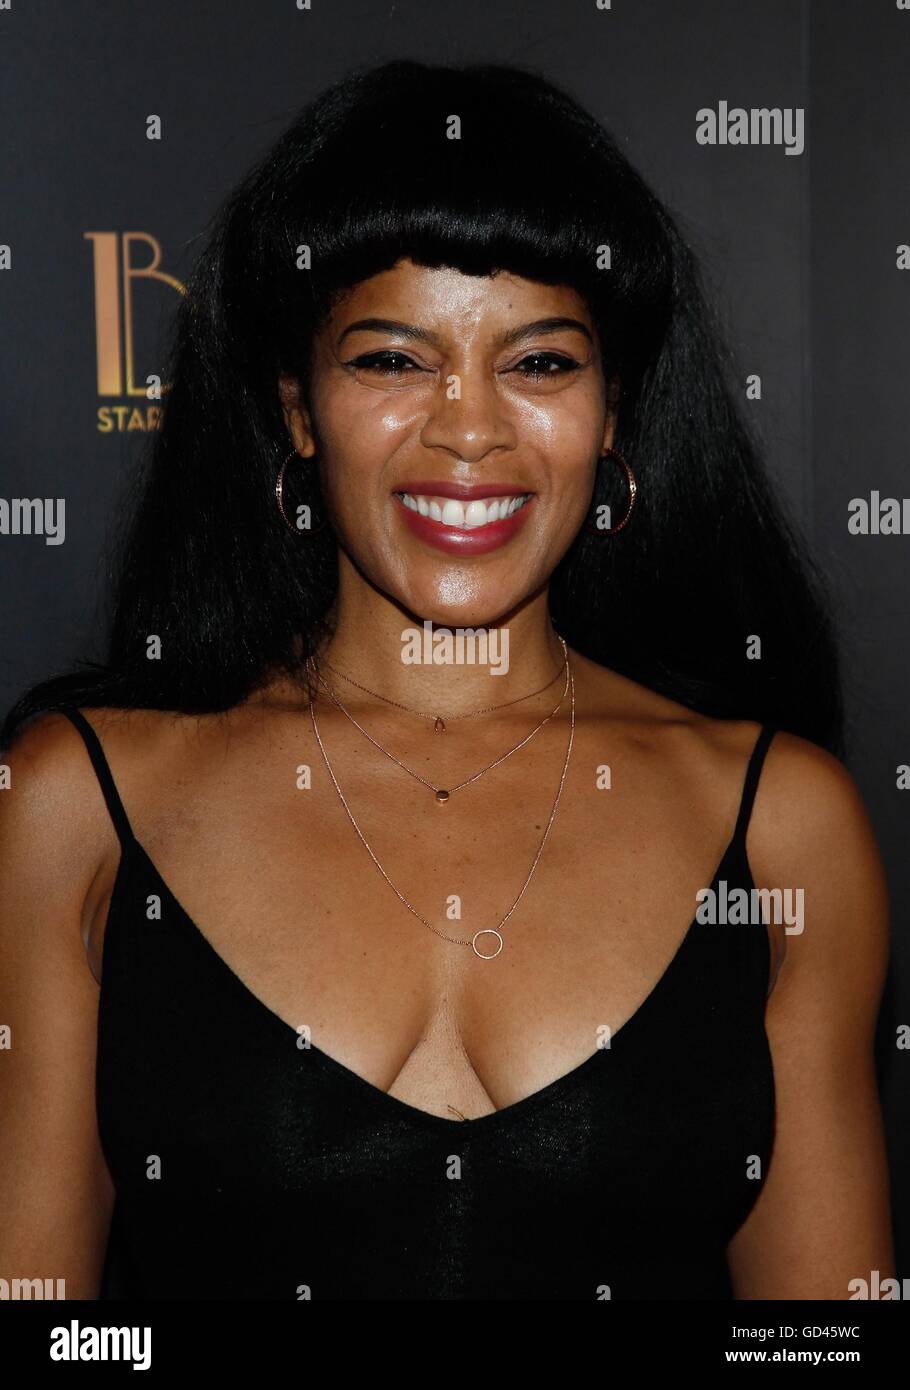 Las Vegas, NV, USA. 12th July, 2016. Dionne Gipson at arrivals for BAZ - Star Crossed Love Opening Celebration, The Palazzo Theatre, Las Vegas, NV July 12, 2016. Credit:  James Atoa/Everett Collection/Alamy Live News Stock Photo